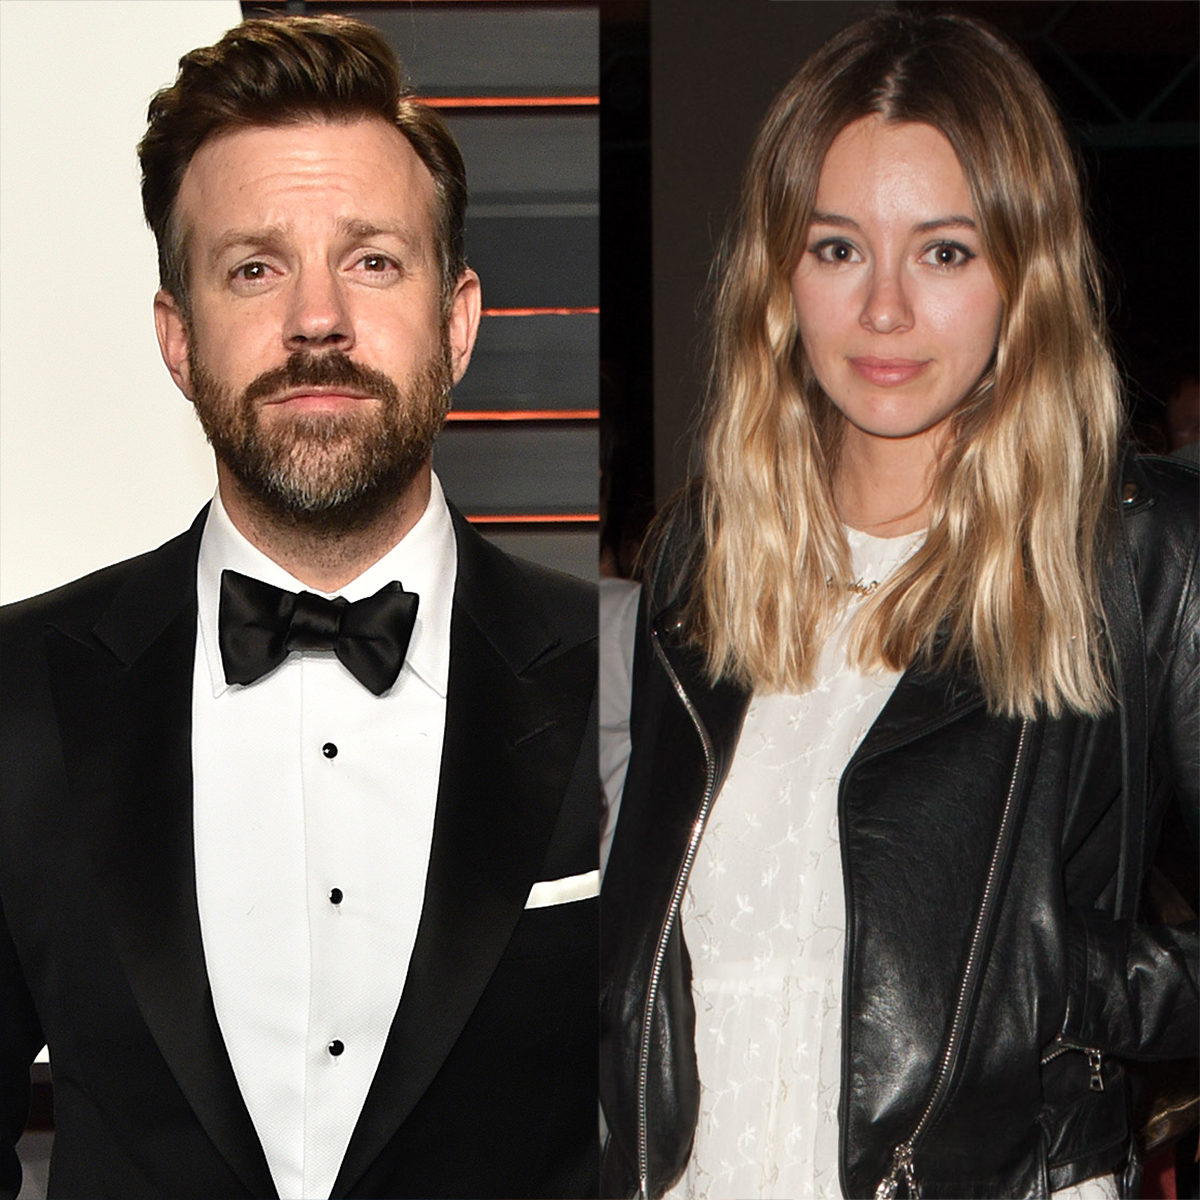 Here’s what’s really going on with Jason Sudeikis and Keeley Hazell